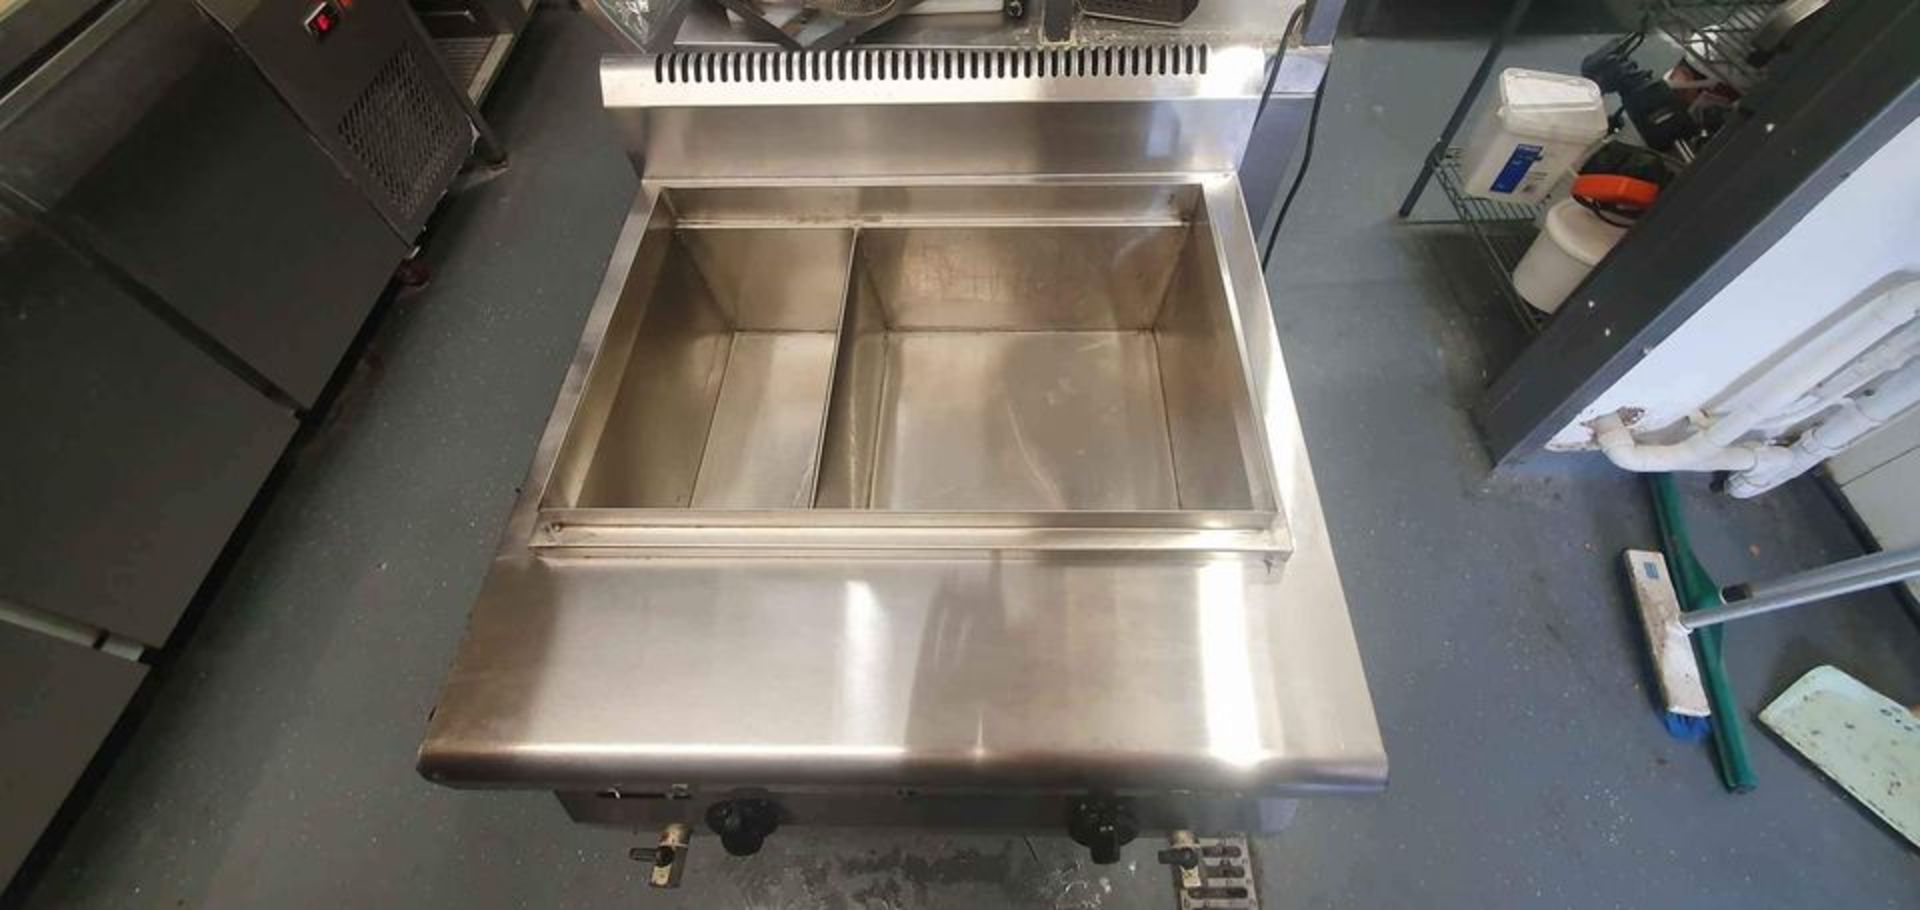 Gas Powered Commercial Pasta Cooker and Bain Marie - Image 6 of 6